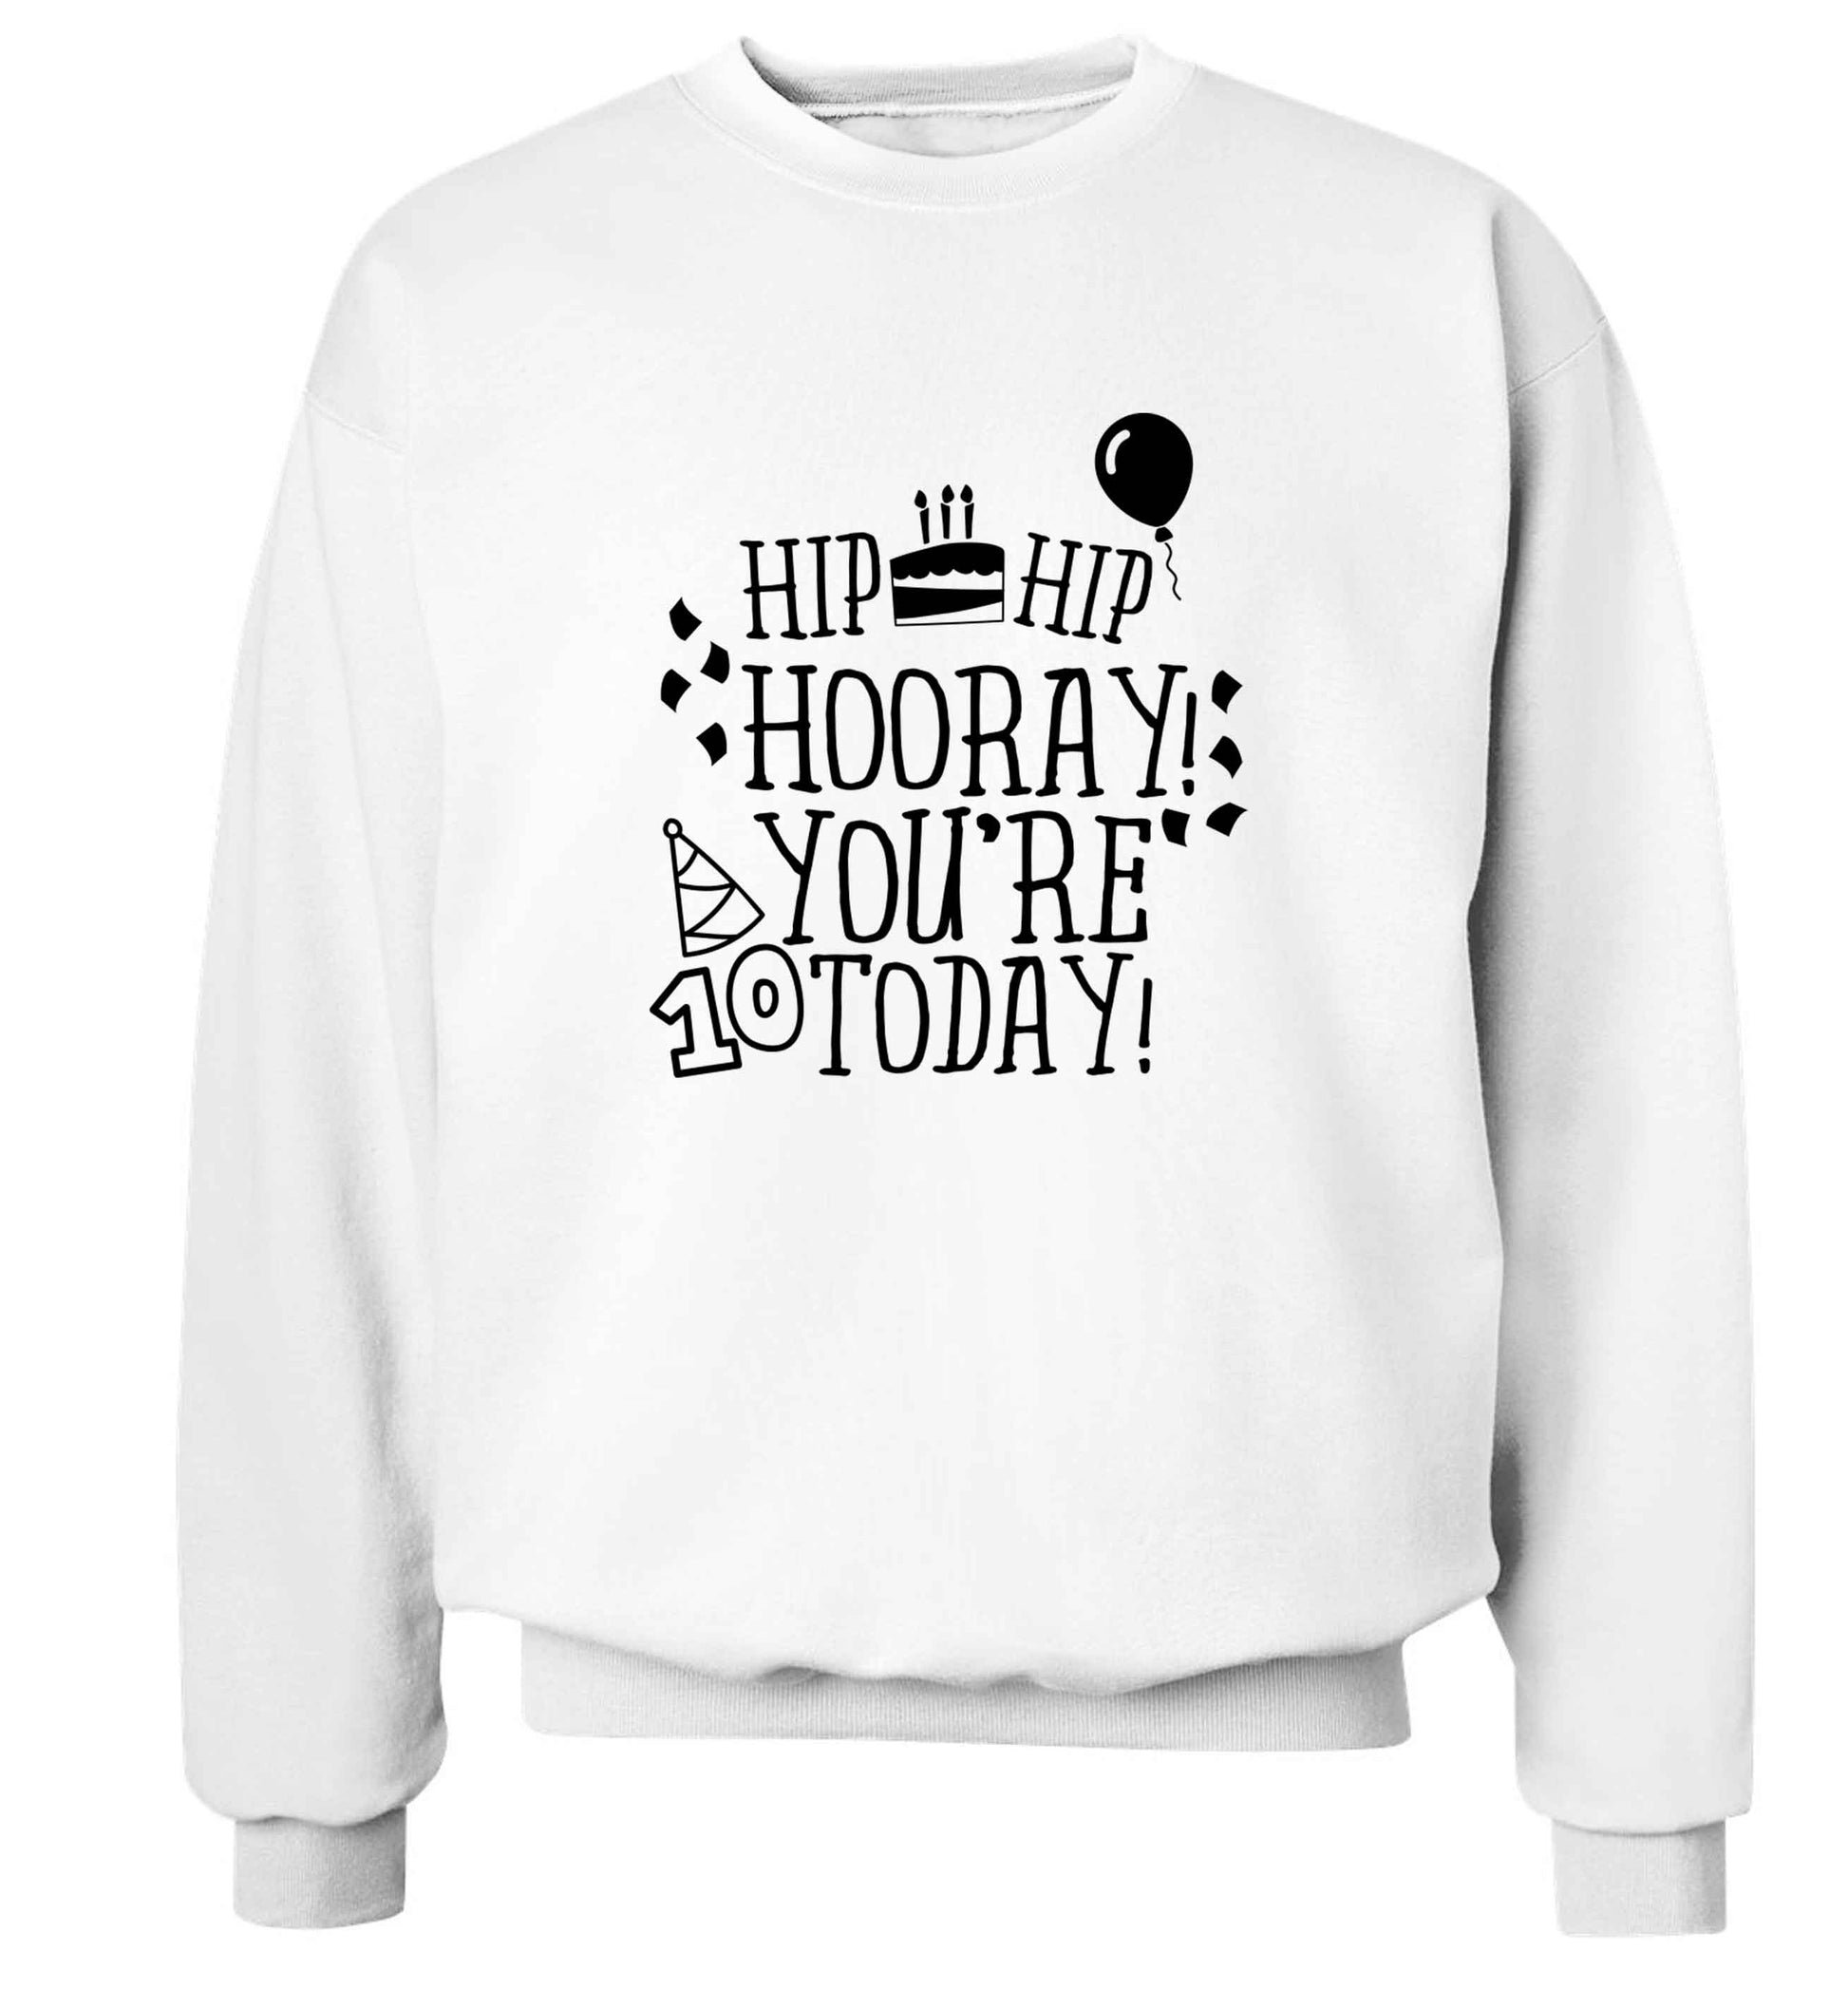 Hip hip hooray you're ten today! adult's unisex white sweater 2XL